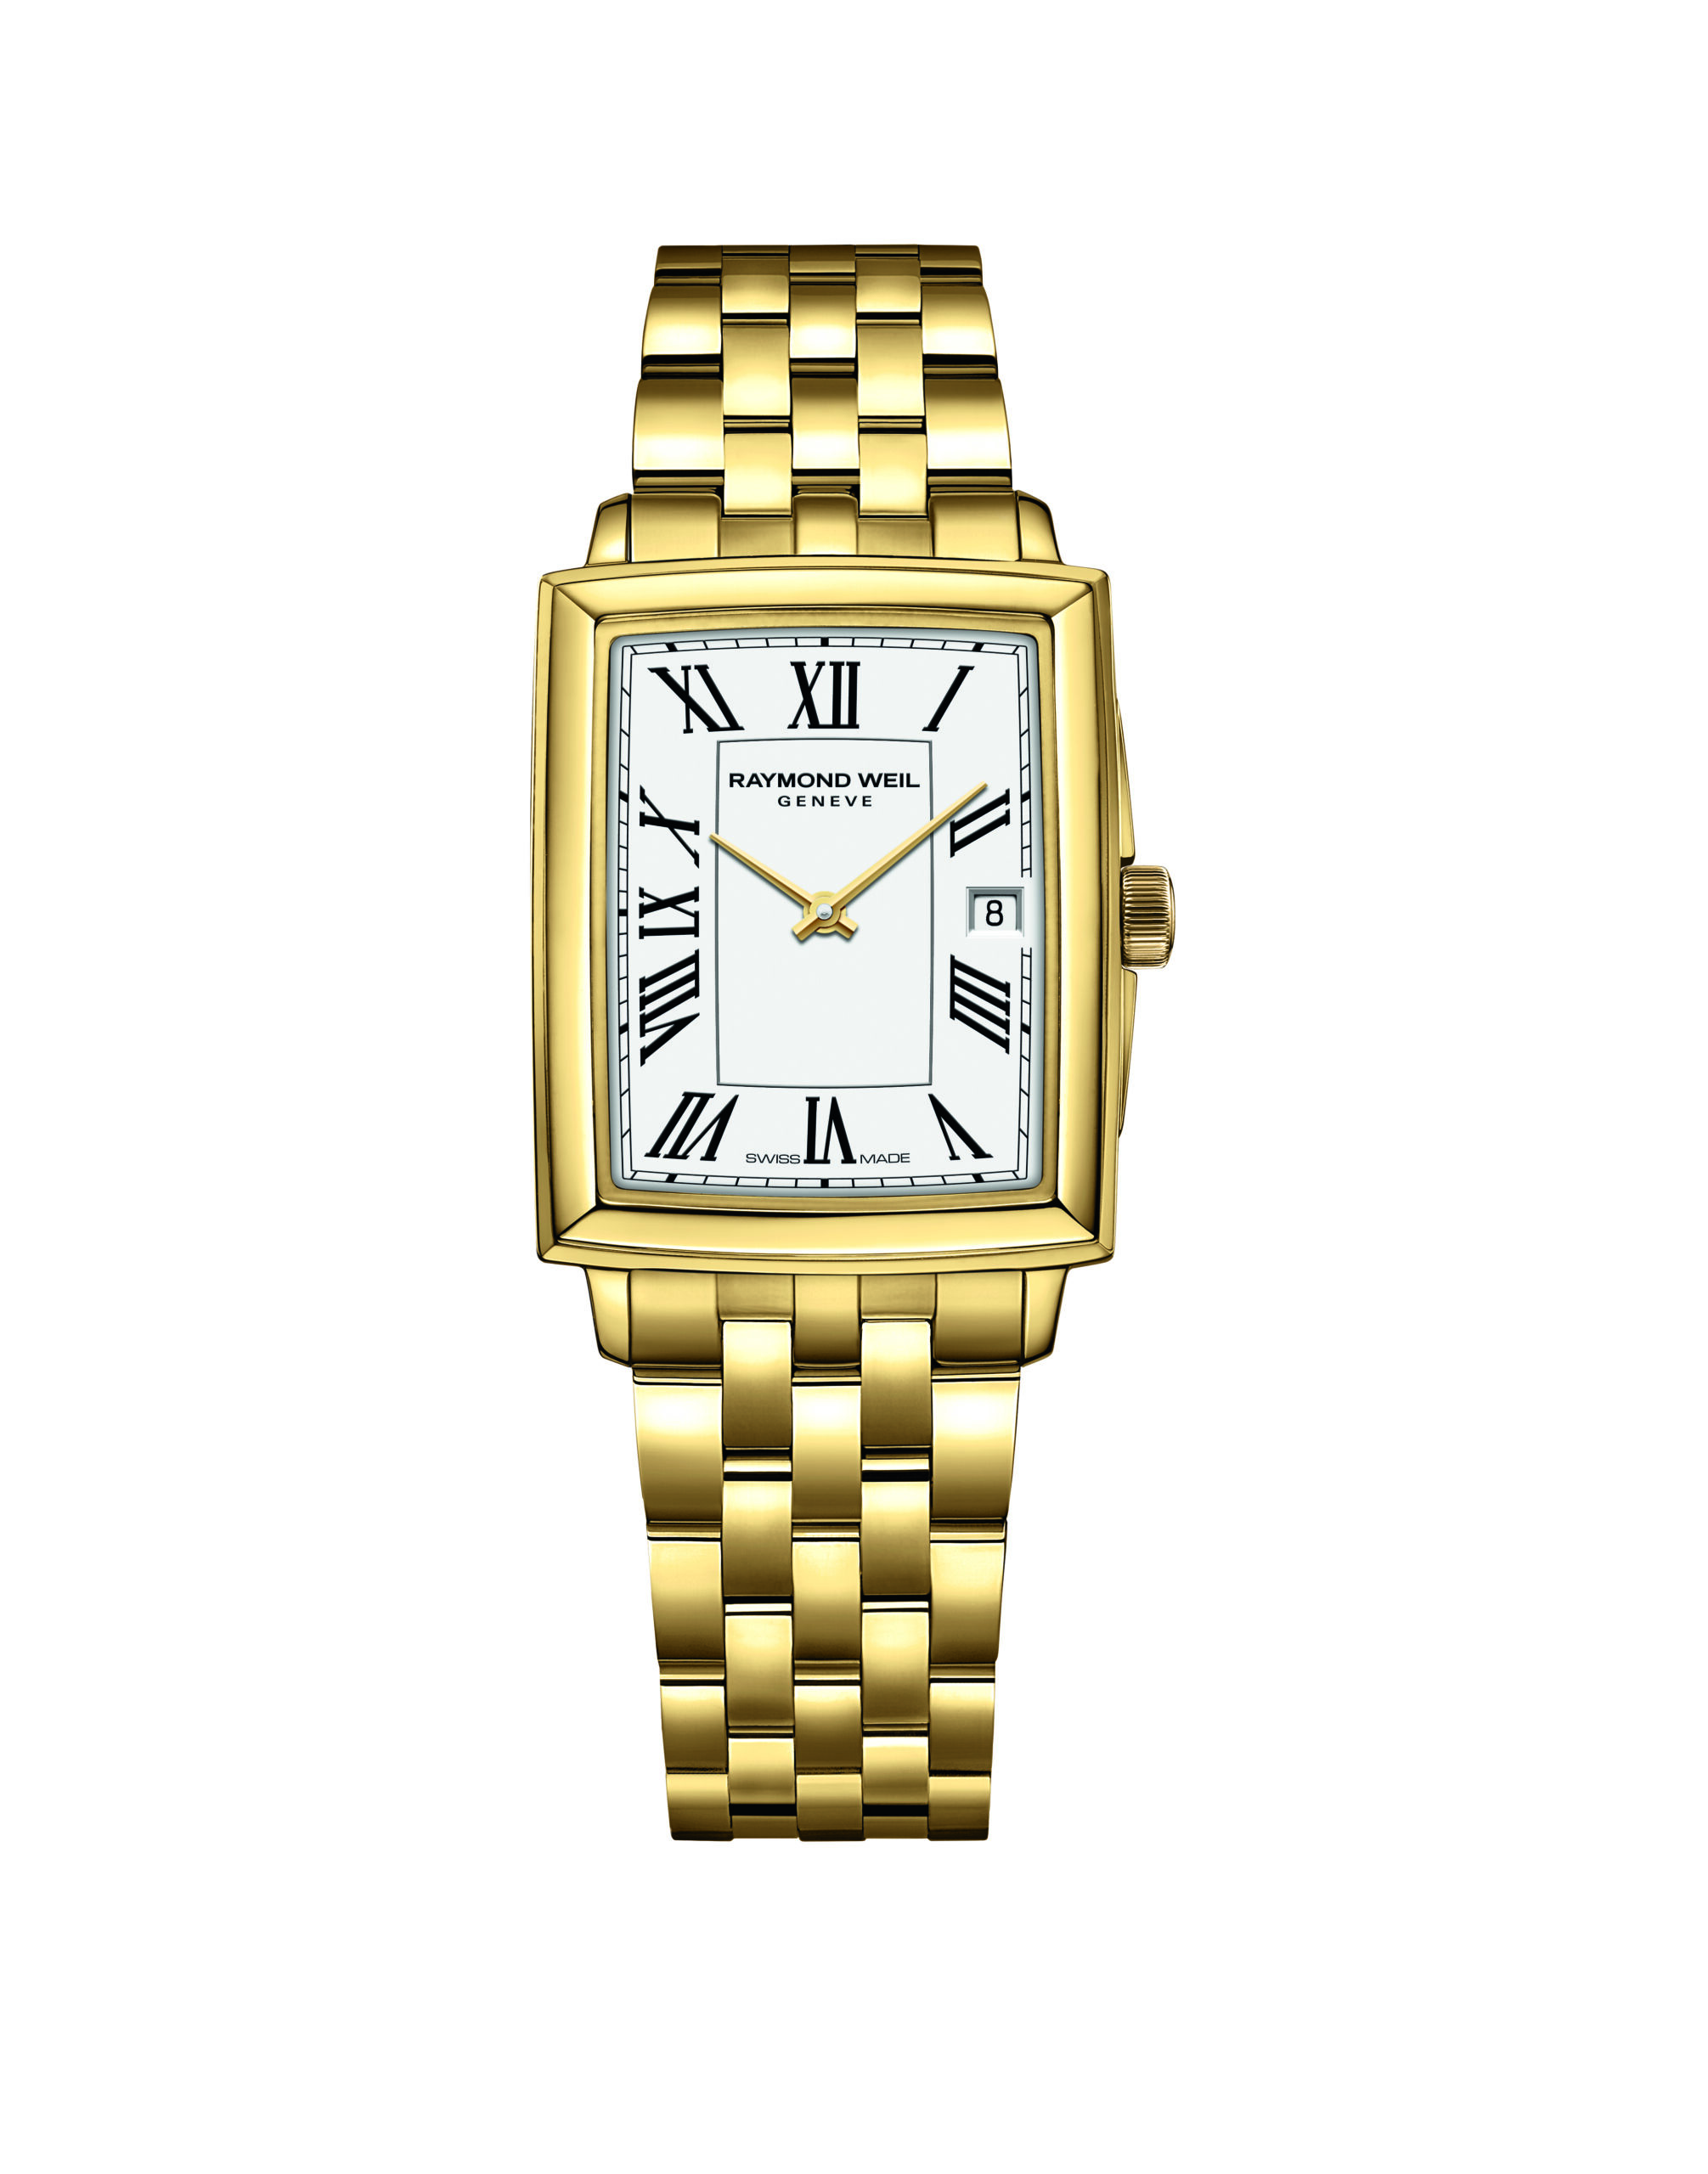 This Raymond Weil Toccata watch features Roman numeral markers, a white dial, and a quartz movement. The bracelet and 25mm X 35mm case are crafted from stainless steel and yellow gold PVD.